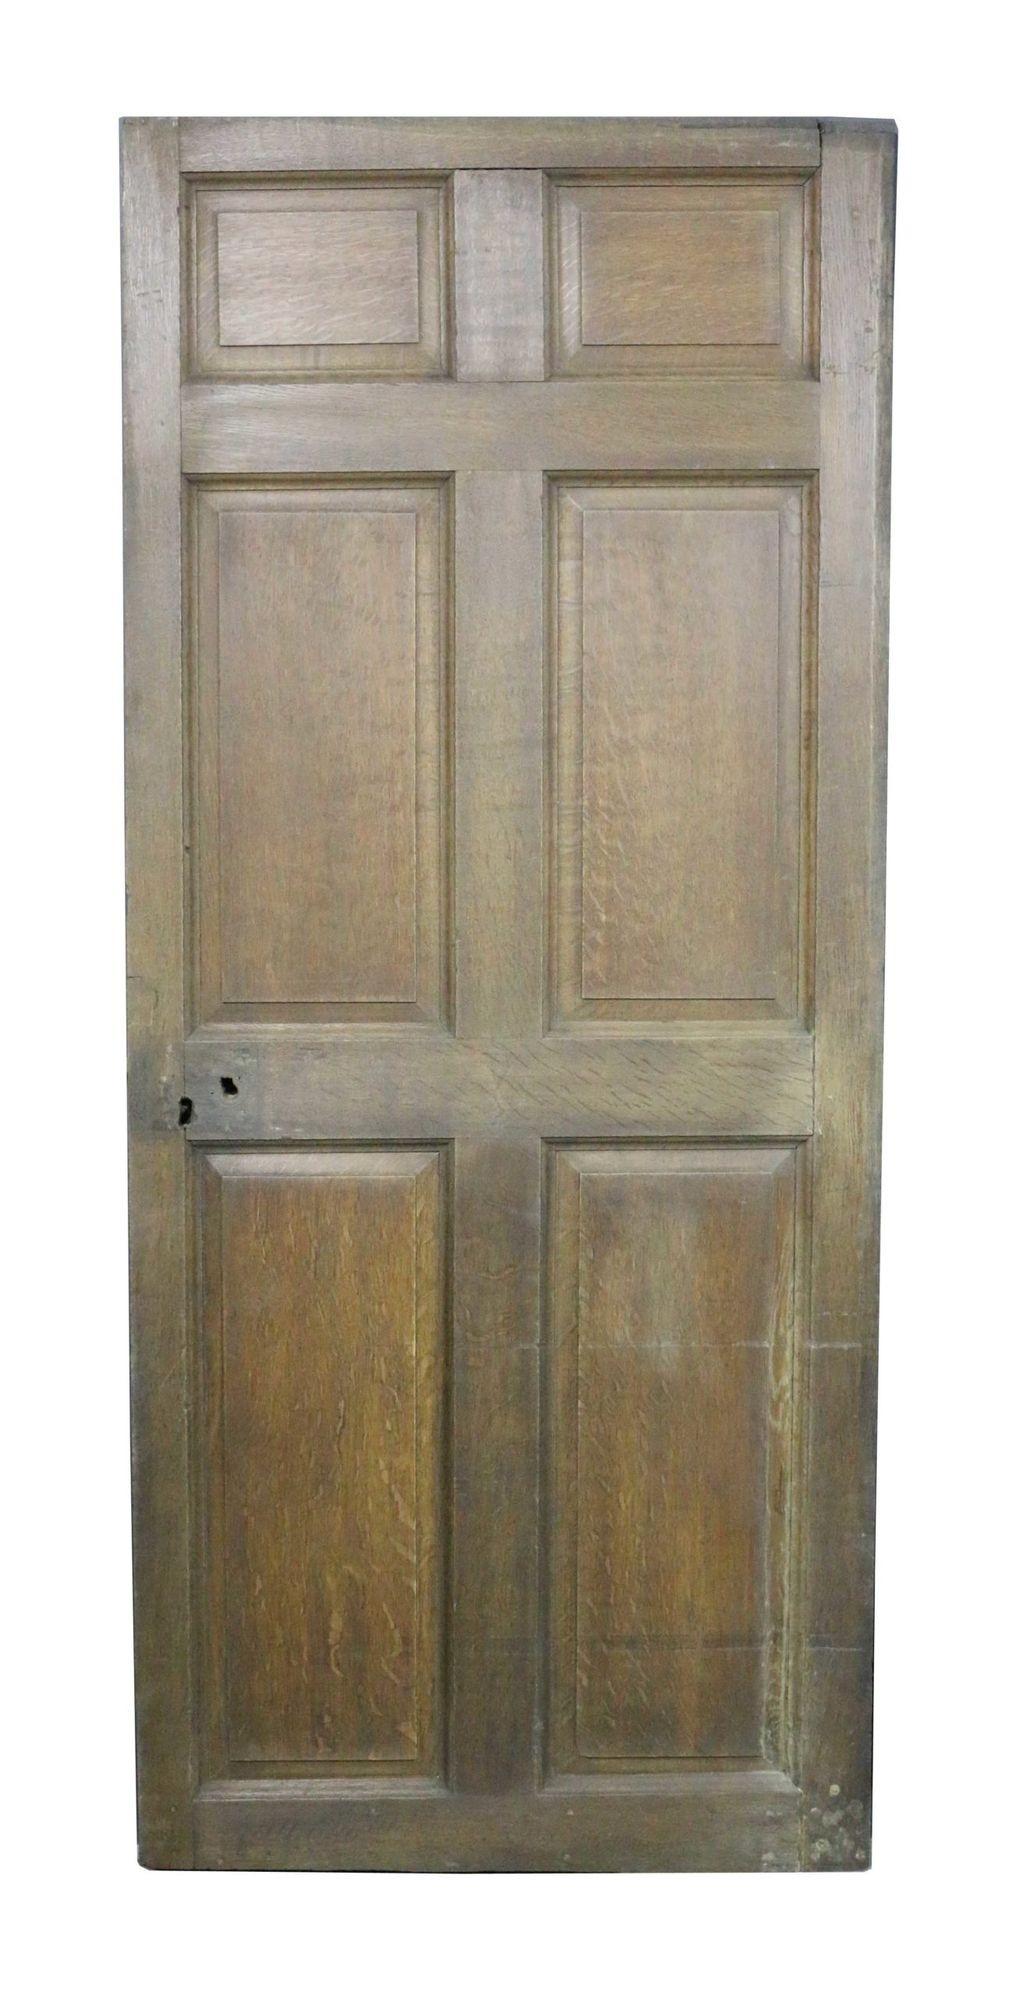 A reclaimed six panel front door constructed from oak.